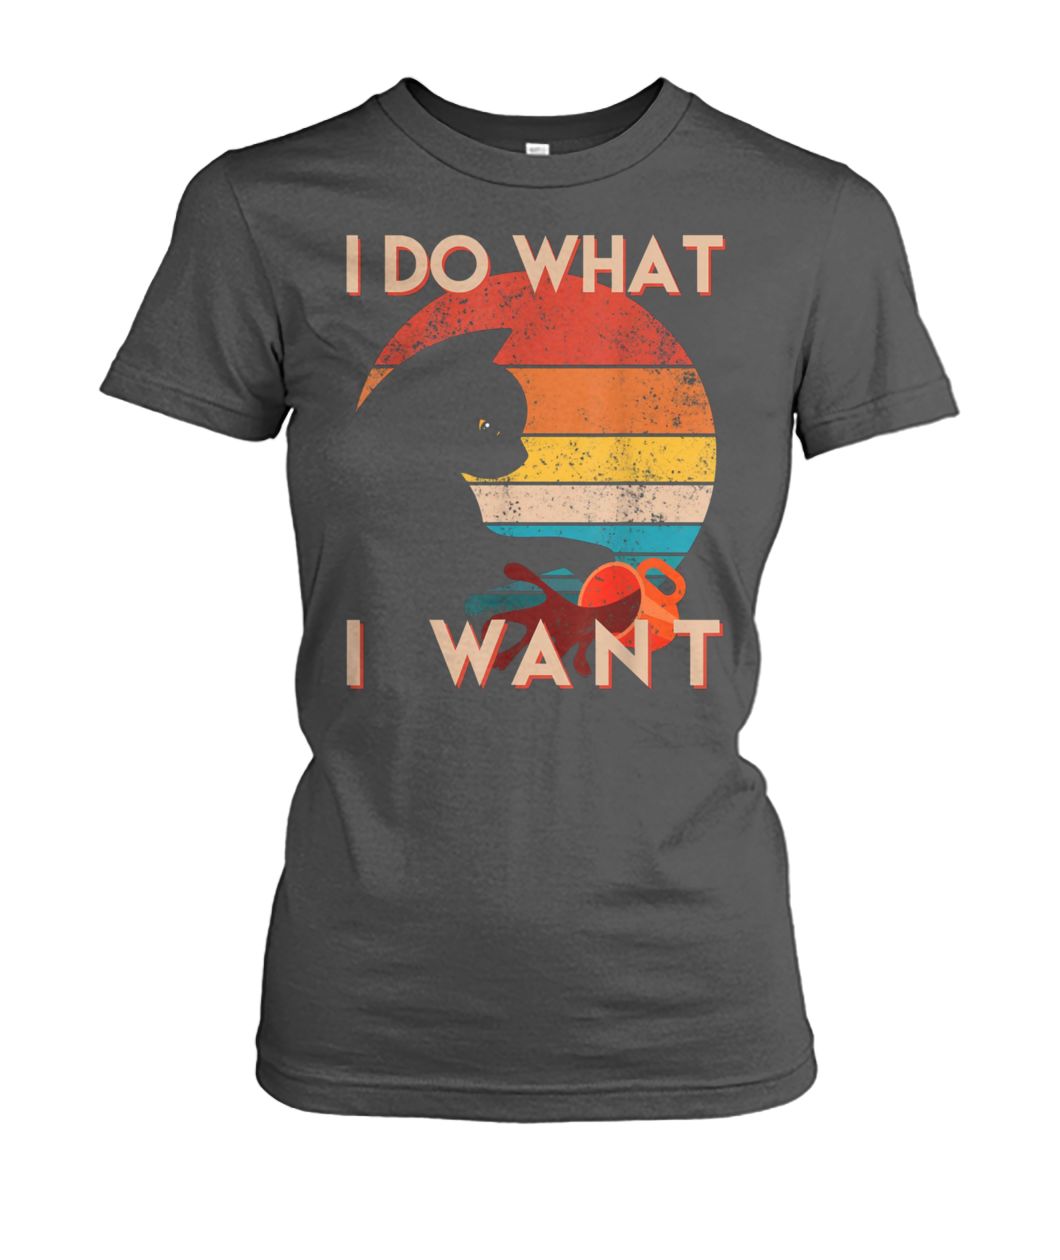 Vintage cat I do what I want women's crew tee